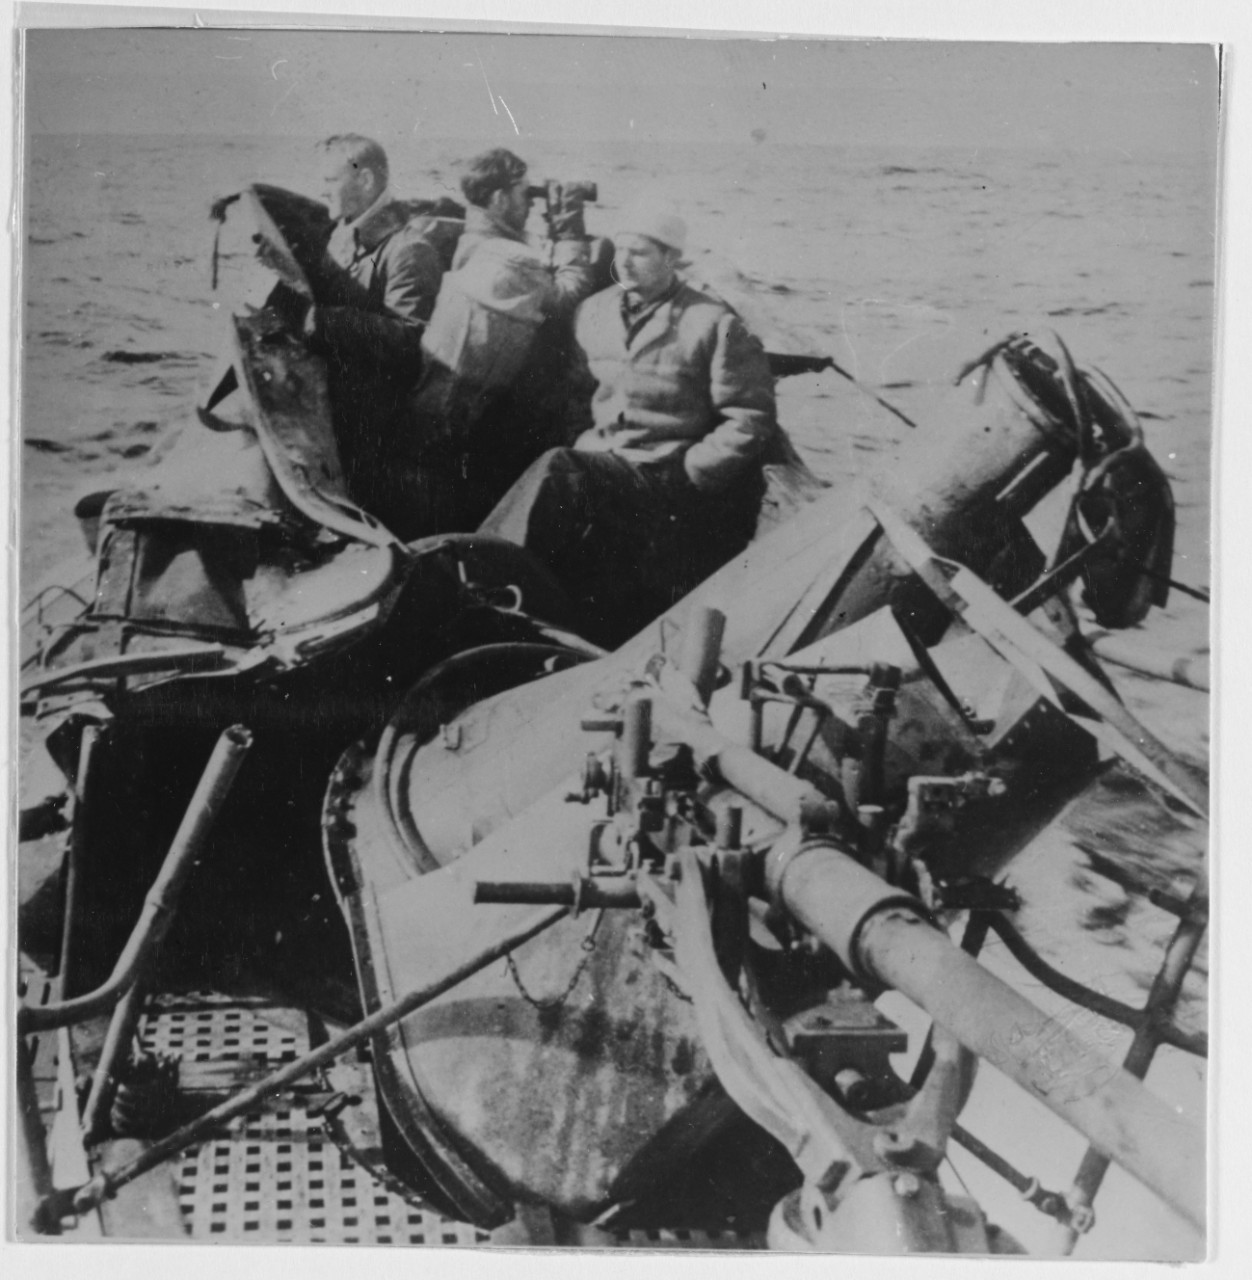 U-46 after collision with a tanker in heavy weather, 6 June 1941, 1005 hours.